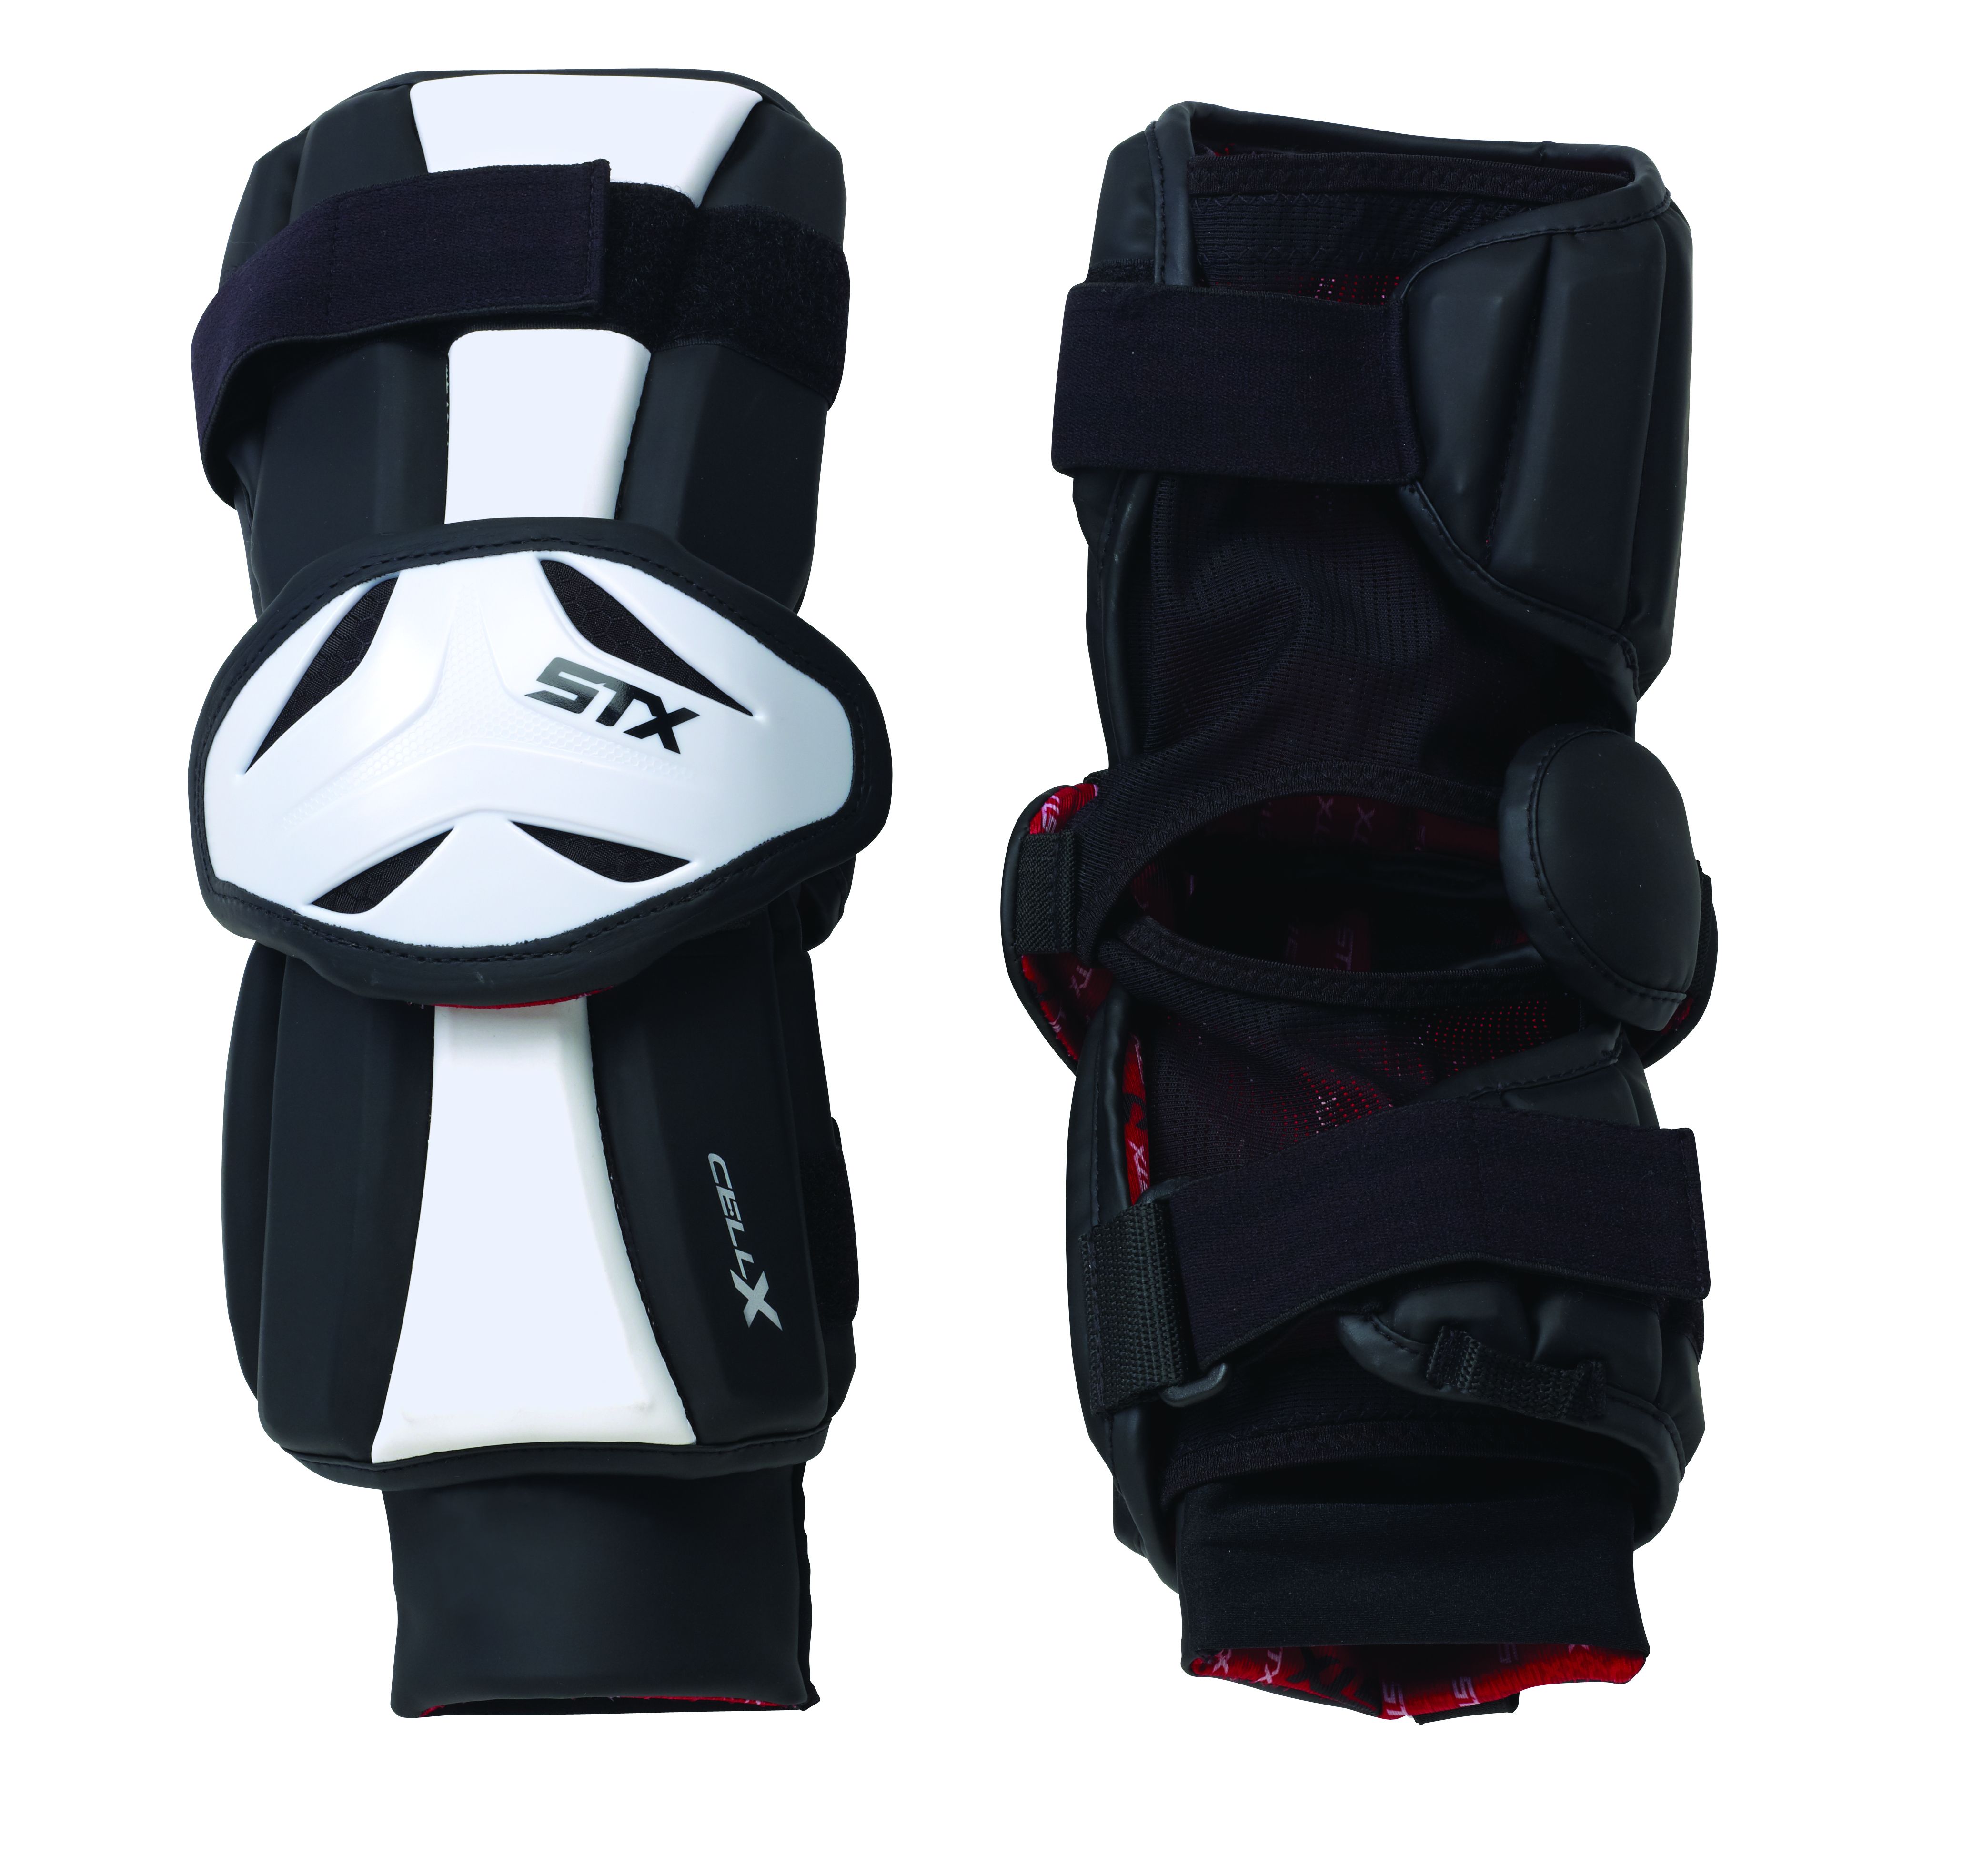 STX K18 Lacrosse Arm Guards Pads Large Red Black Protective Gear Sports 